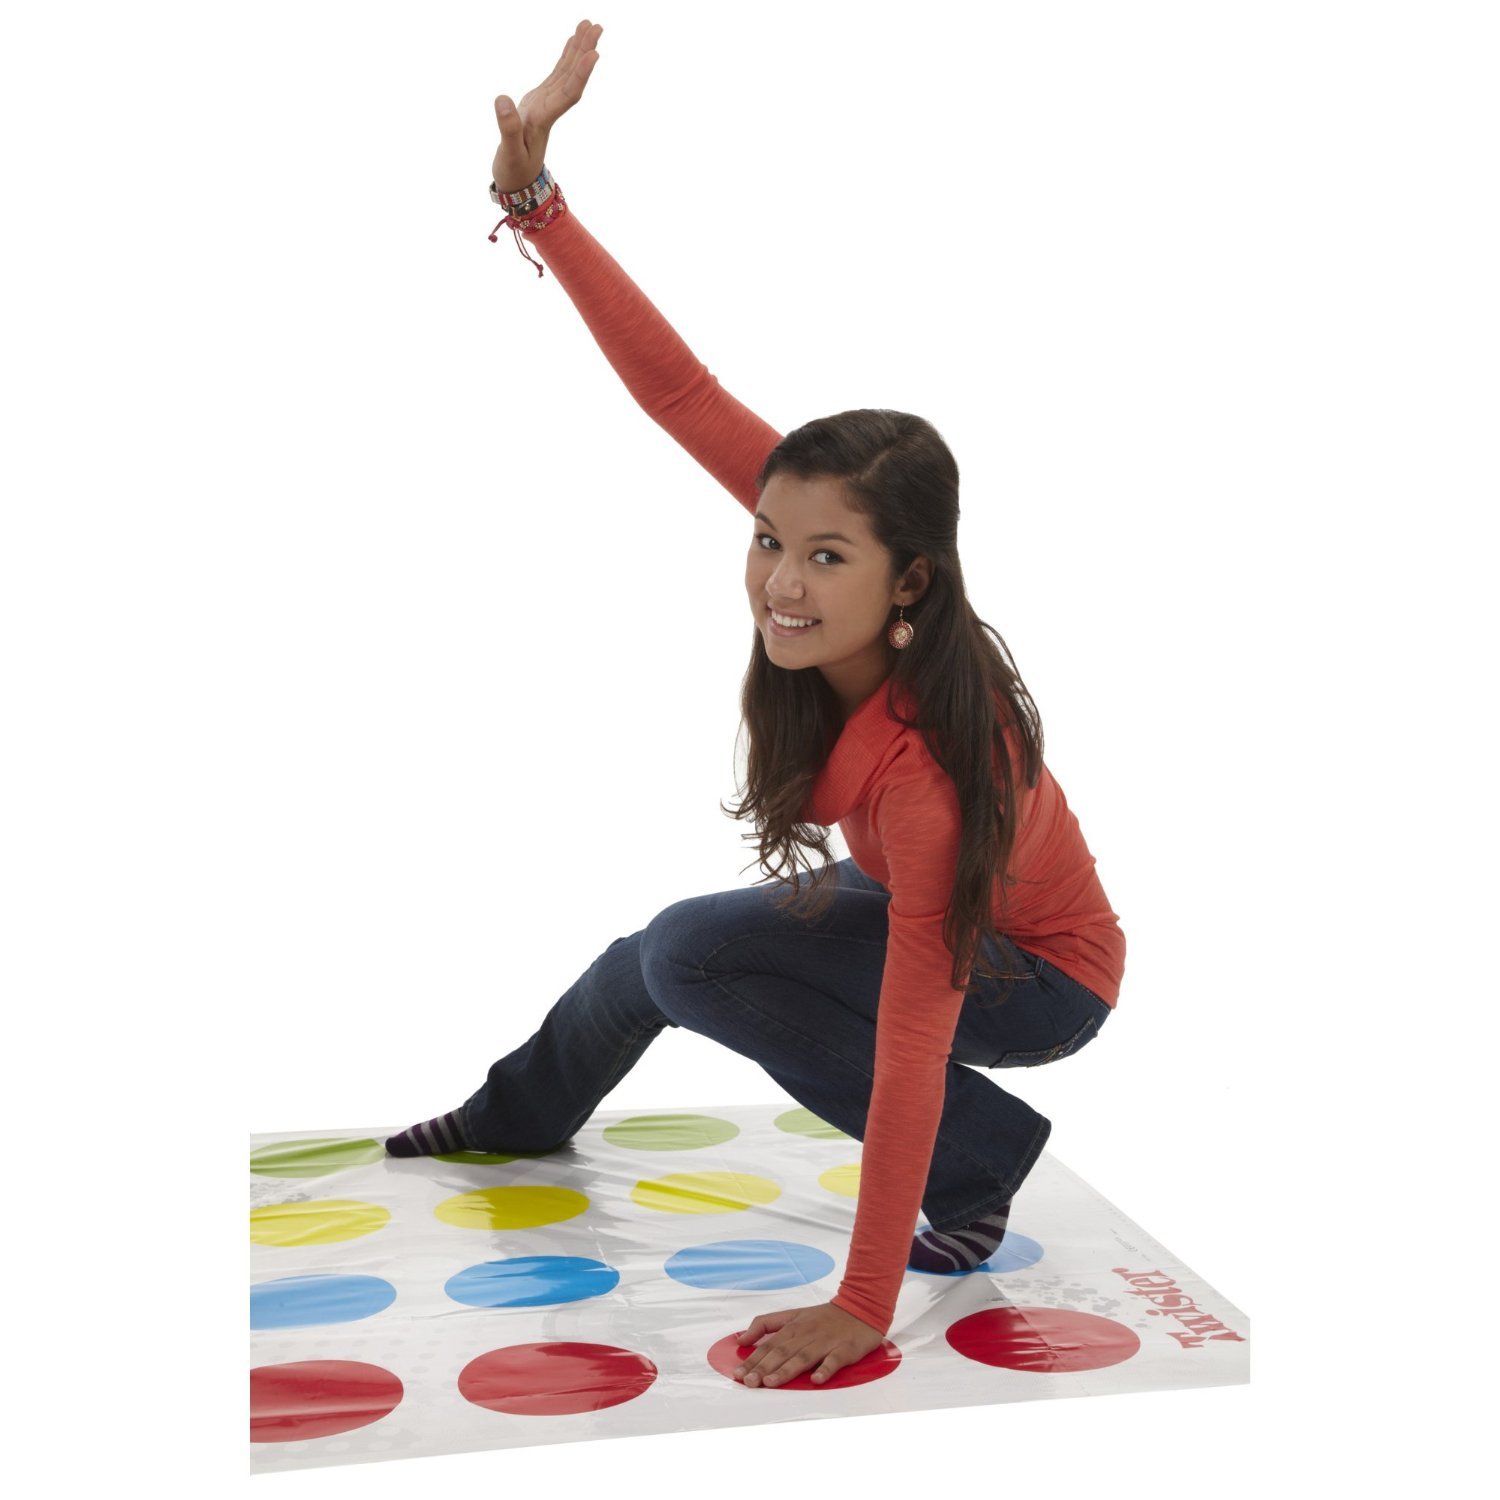 Hasbro Twister Party Classic Board Game for 2 or More Players,Indoor and Outdoor Game for Kids 6 and Up,Packaging May Vary